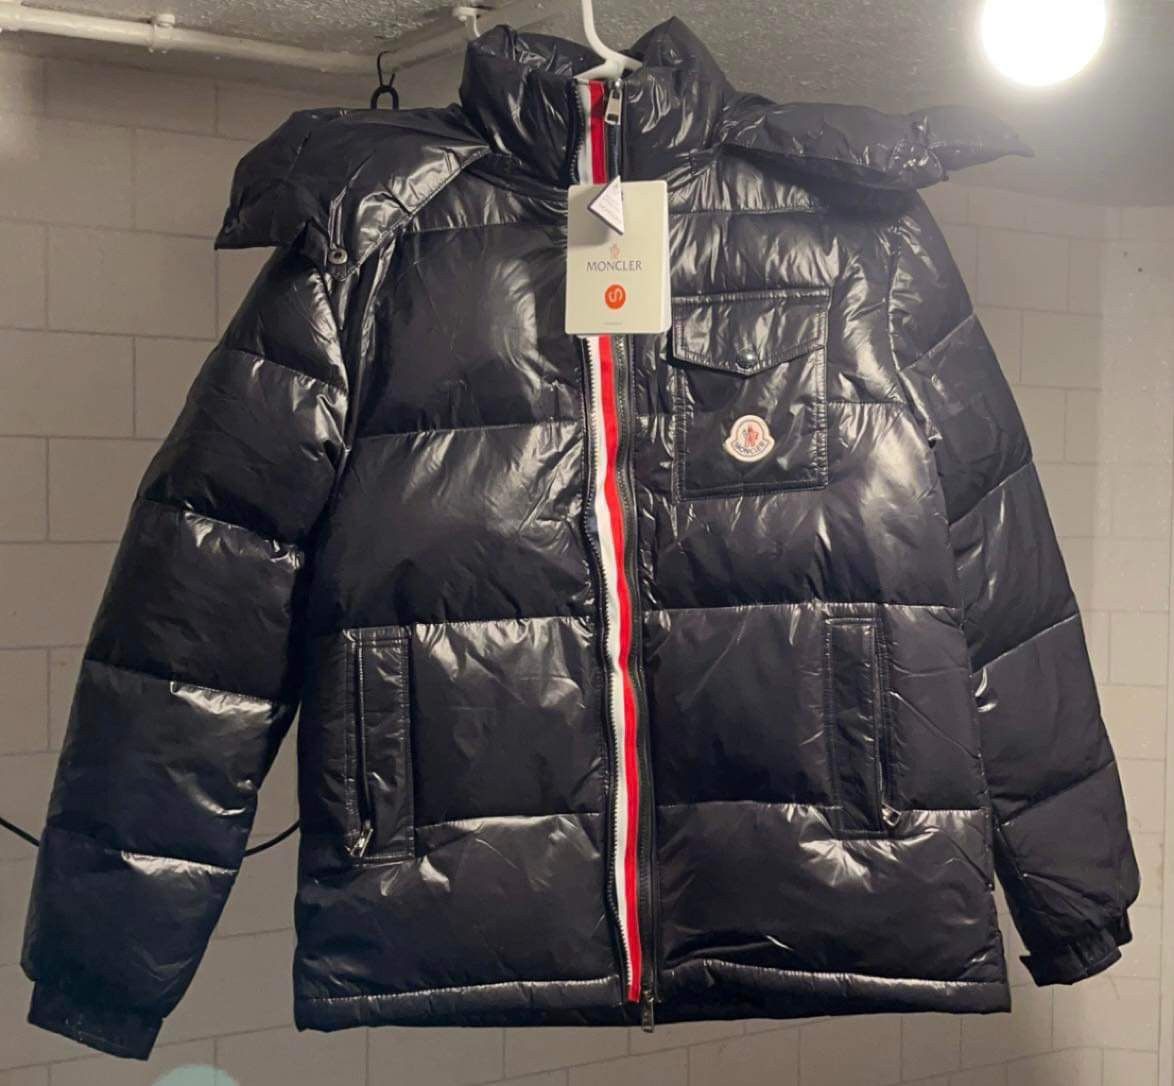 Moncler Moncler puffa jacket brand new with tags nfc tag scans | Grailed